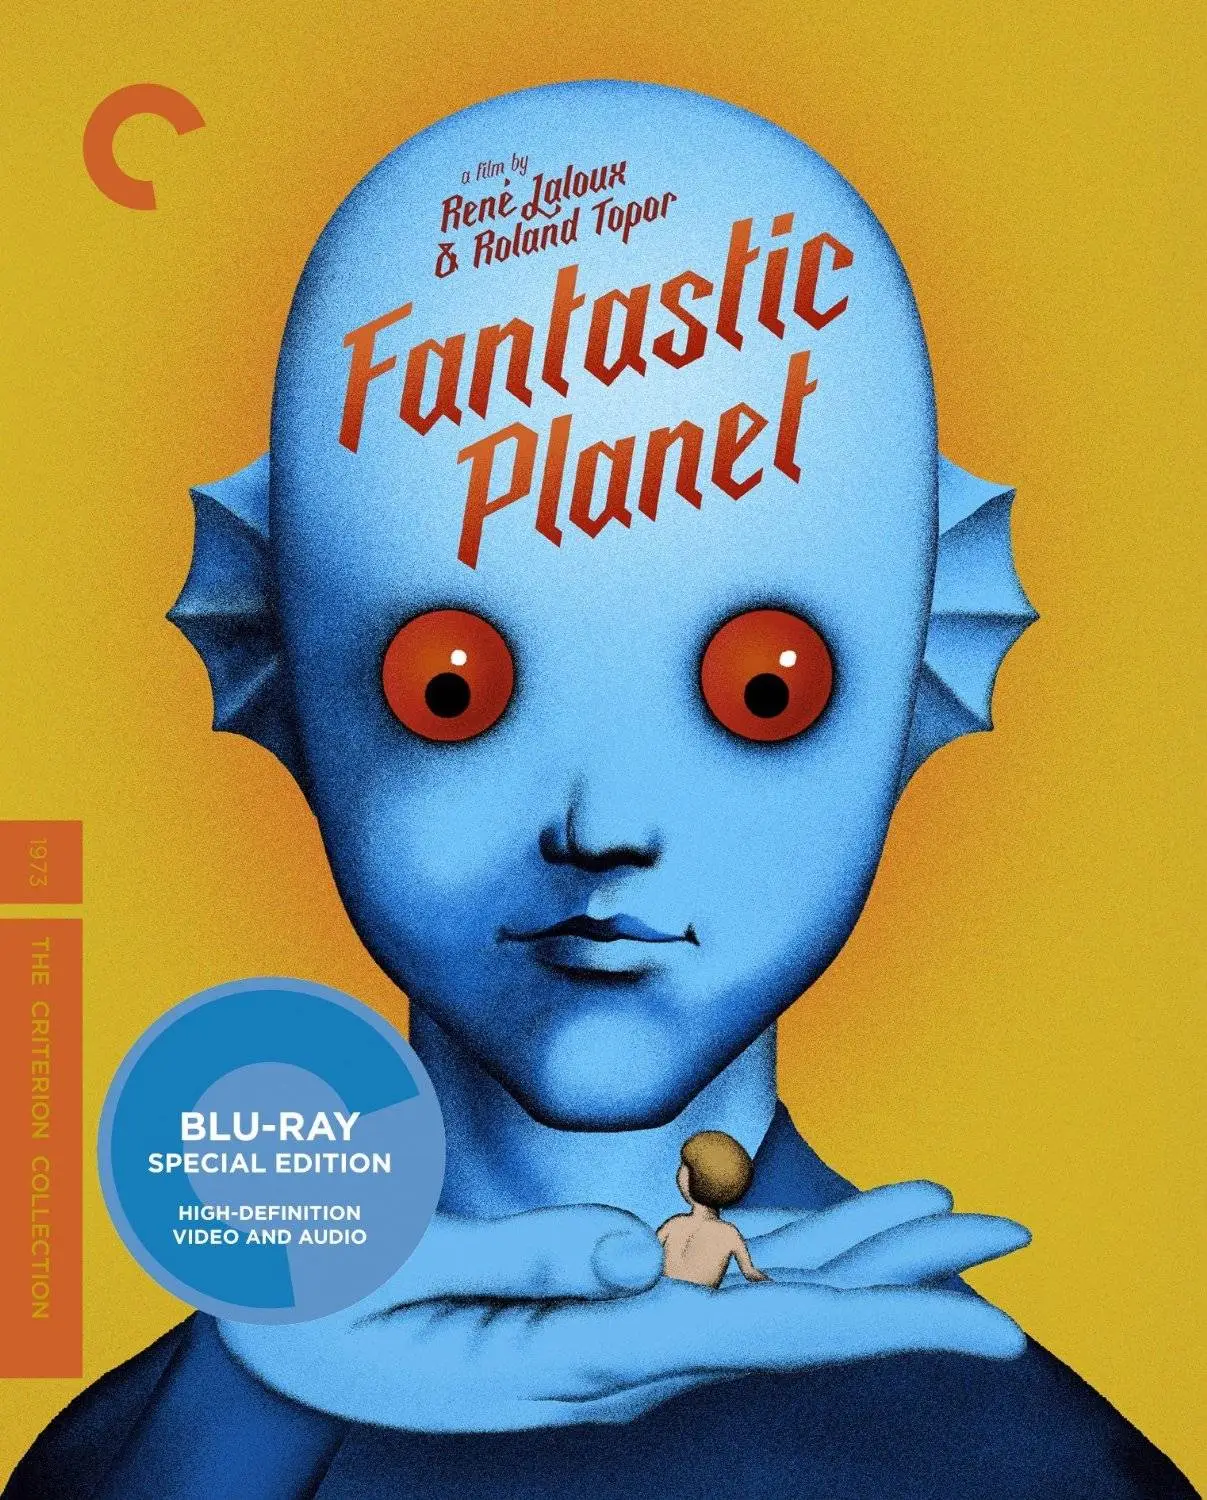 Fantastic Planet (1973) + Extras [The Criterion Collection]